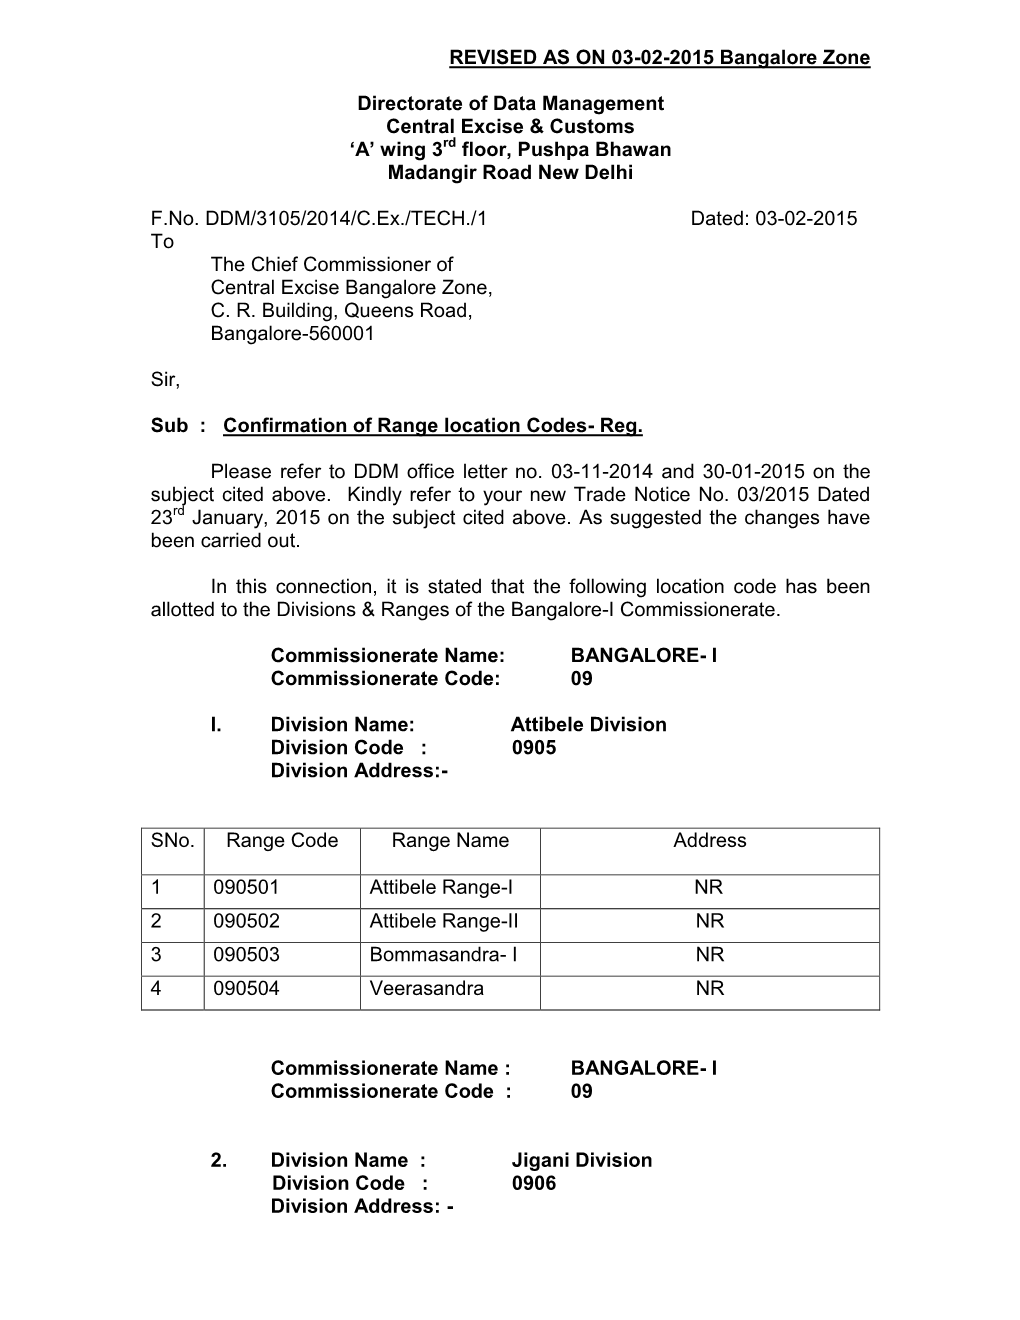 REVISED AS on 03-02-2015 Bangalore Zone Directorate